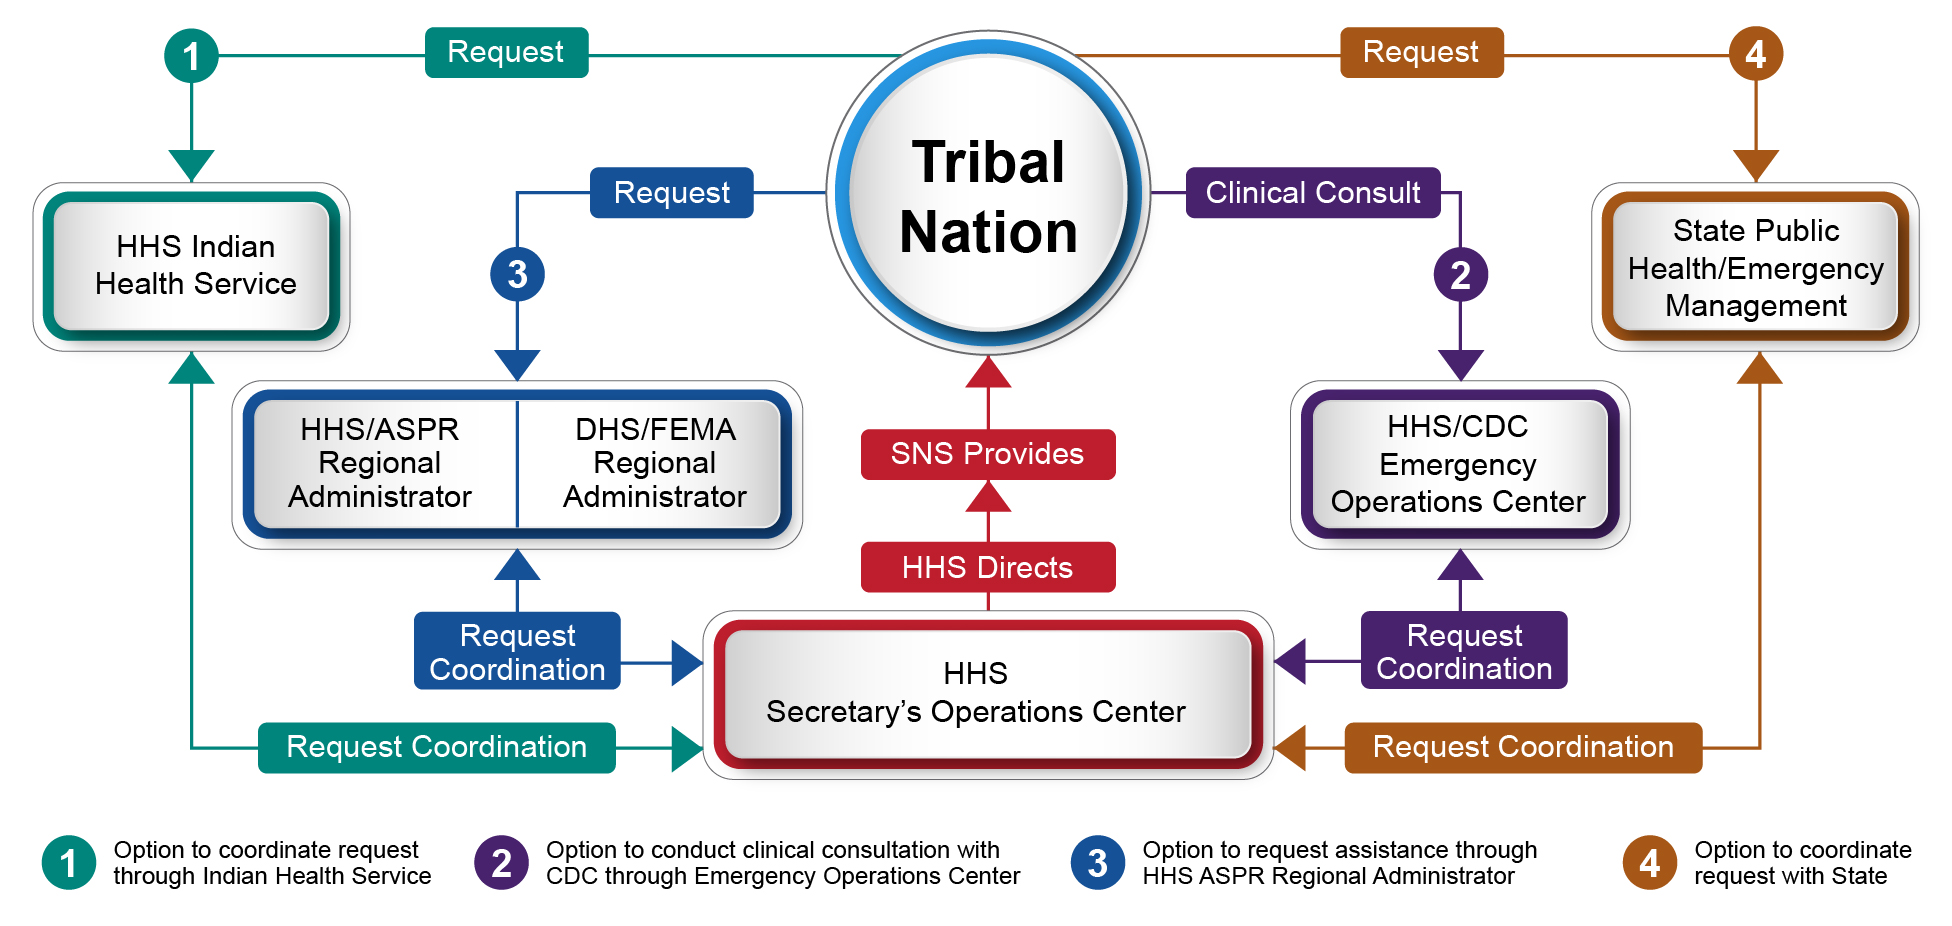 The flow chart shows the recommended pathways for Tribal Nation to Requests for SNS support.